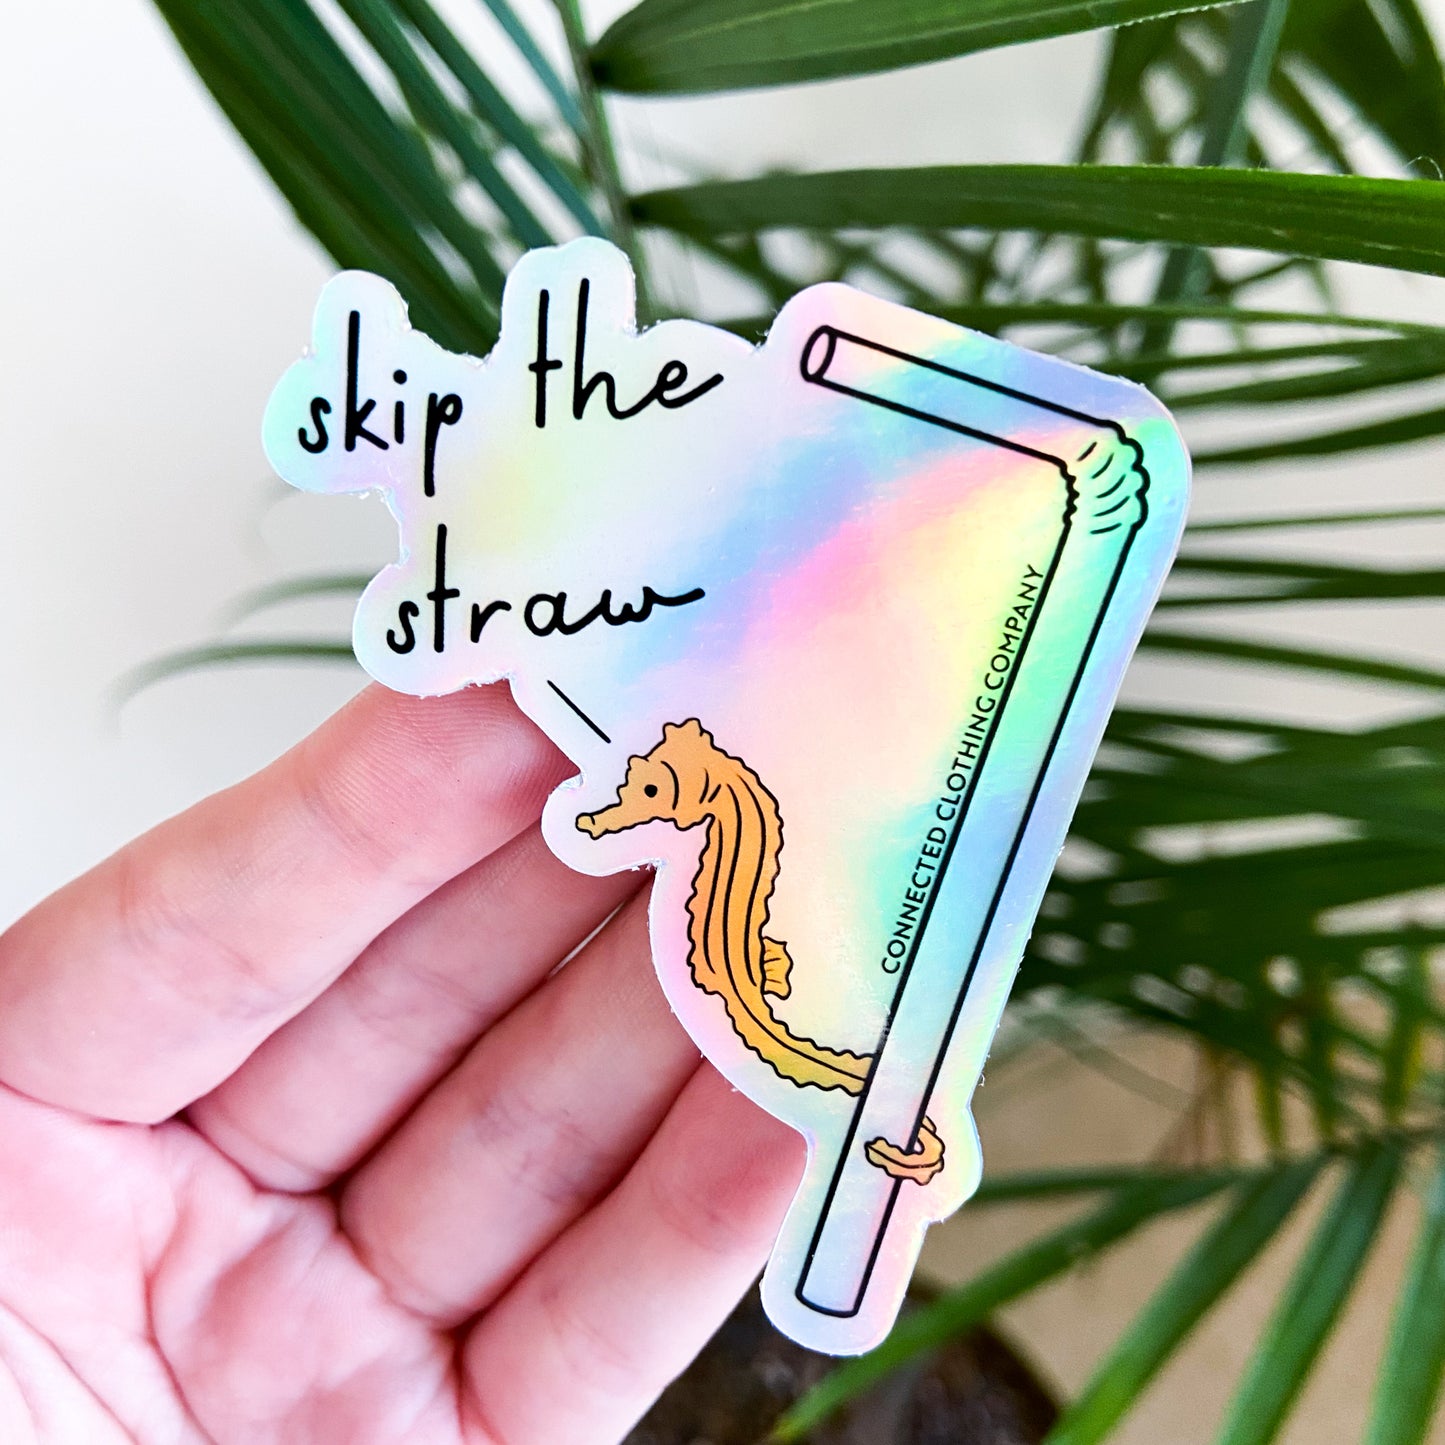 Holographic Skip The Straw Seahorse Sticker (Seahorse holding onto straw while saying skip the straw) - Connected Clothing Company - Ethically and Sustainably Made - $1 donated to Mission Blue ocean conservation